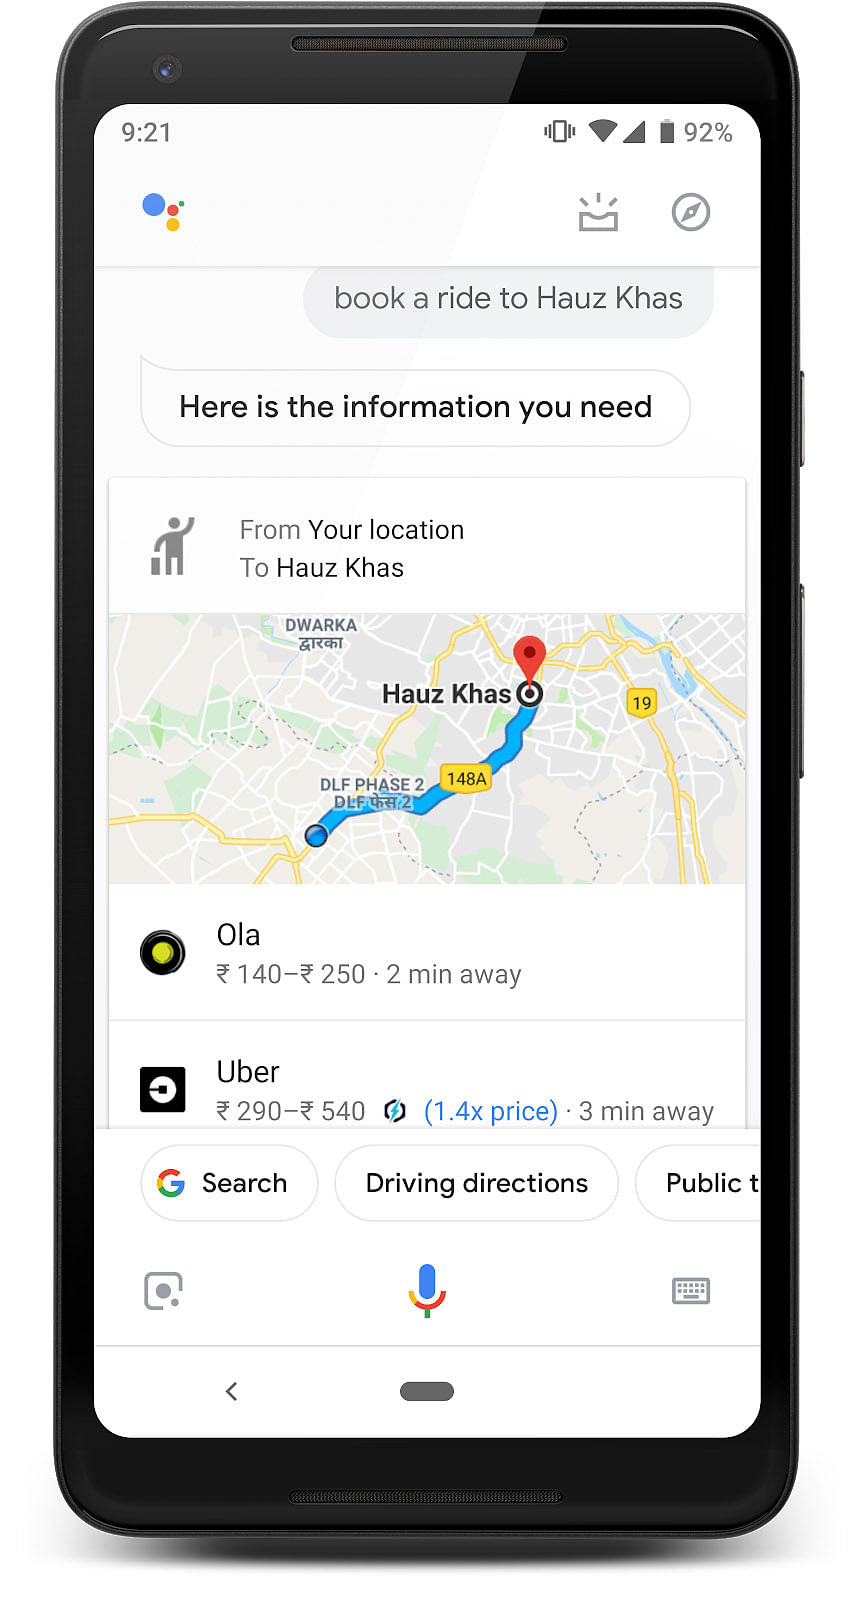 Google Assistant on mobile can be used to book Ola or Uber in India. 